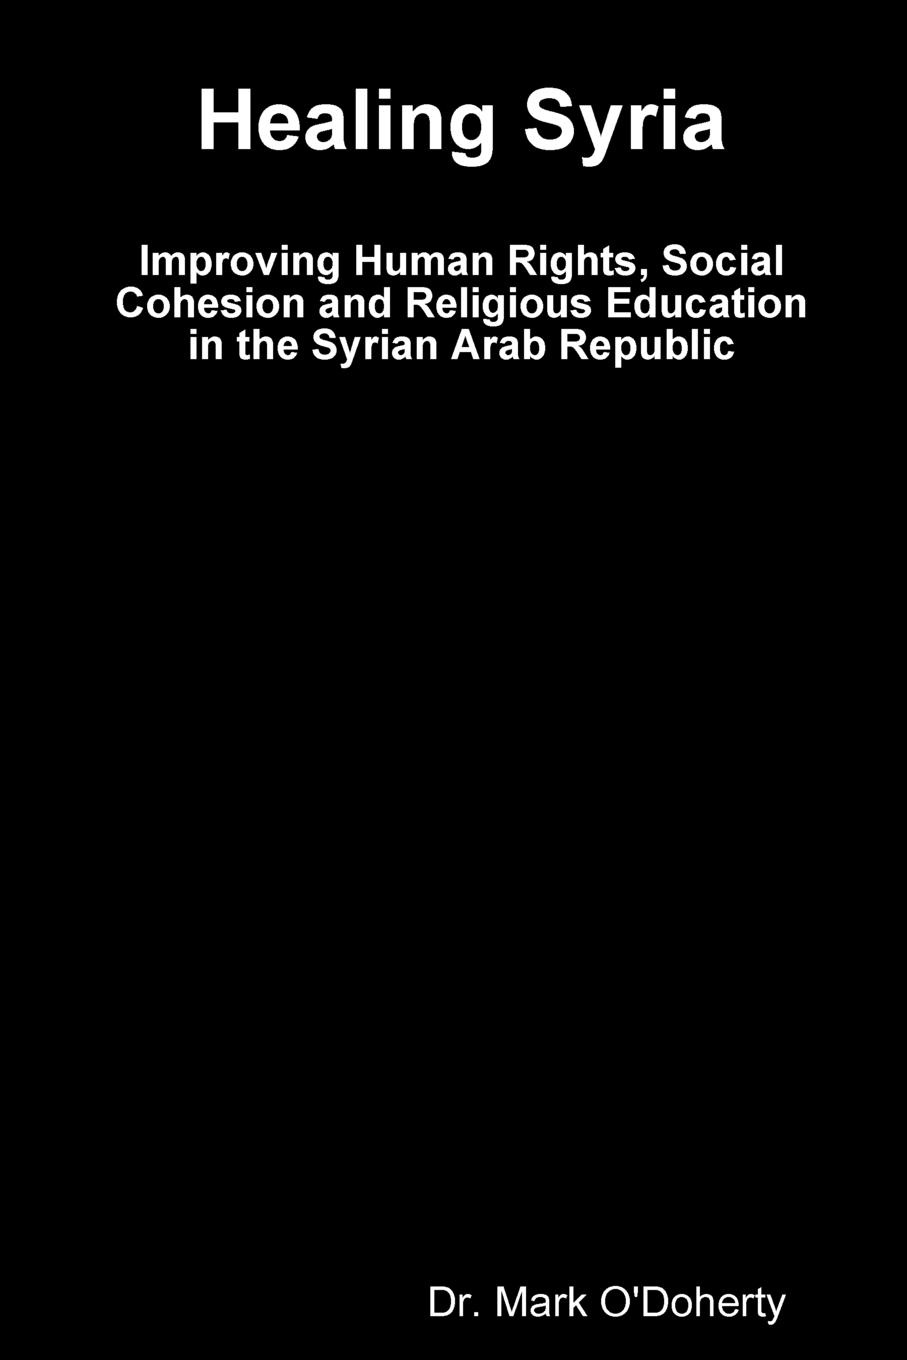 фото Healing Syria Improving Human Rights, Social Cohesion and Religious Education in the Syrian Arab Republic